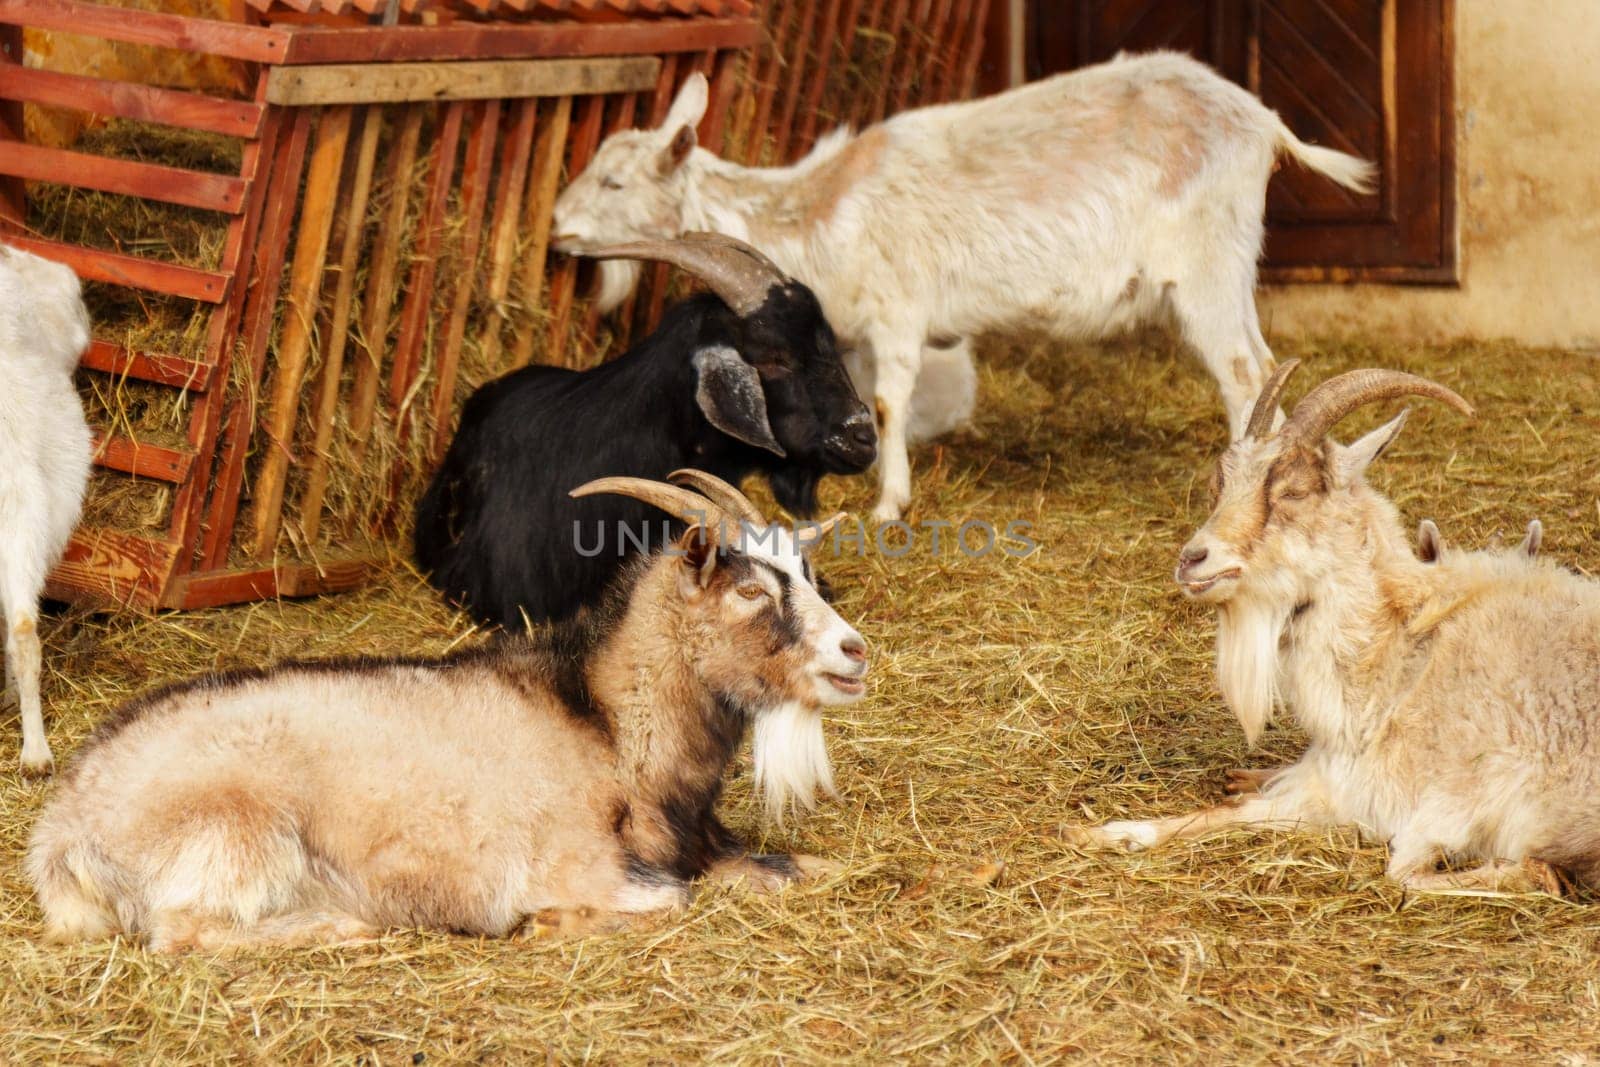 Goats on farm look peaceful and content in their enclosed environment. Selective focus by darksoul72